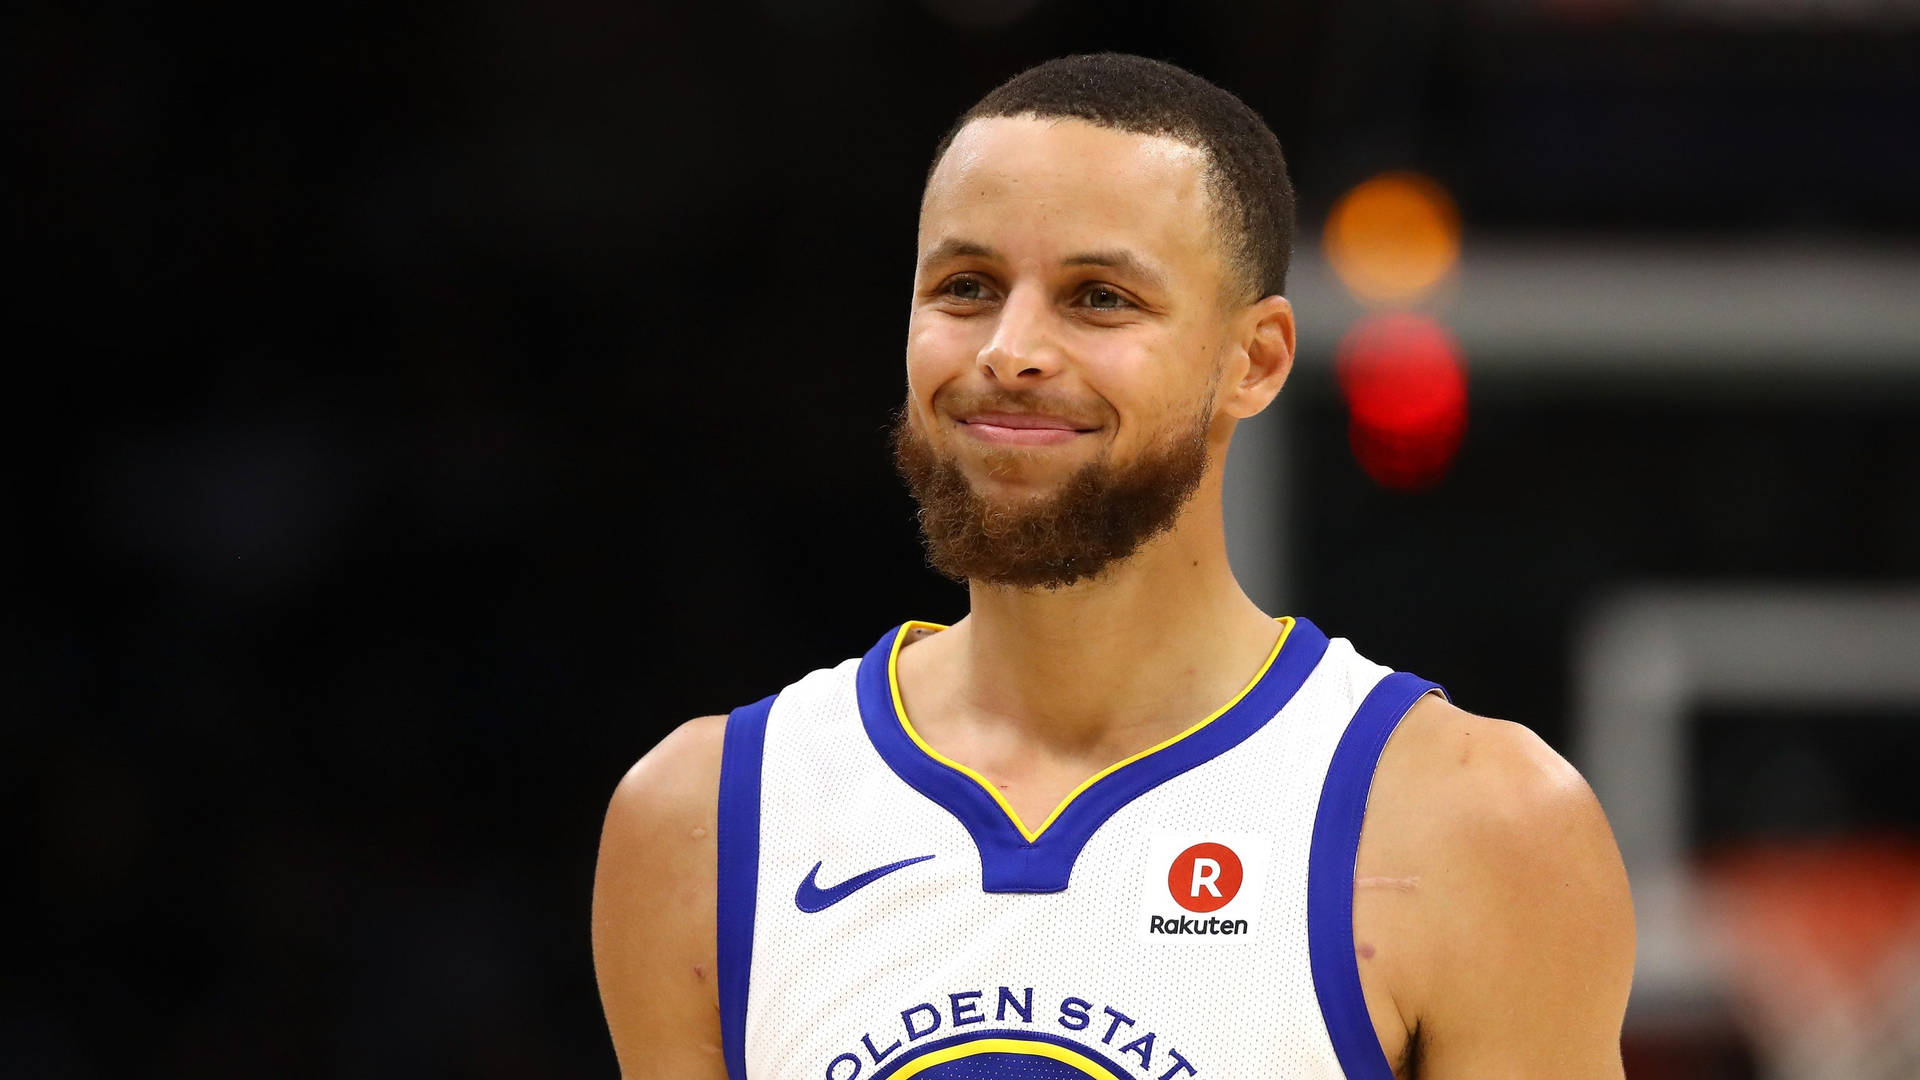 Steph Curry Smiling Background